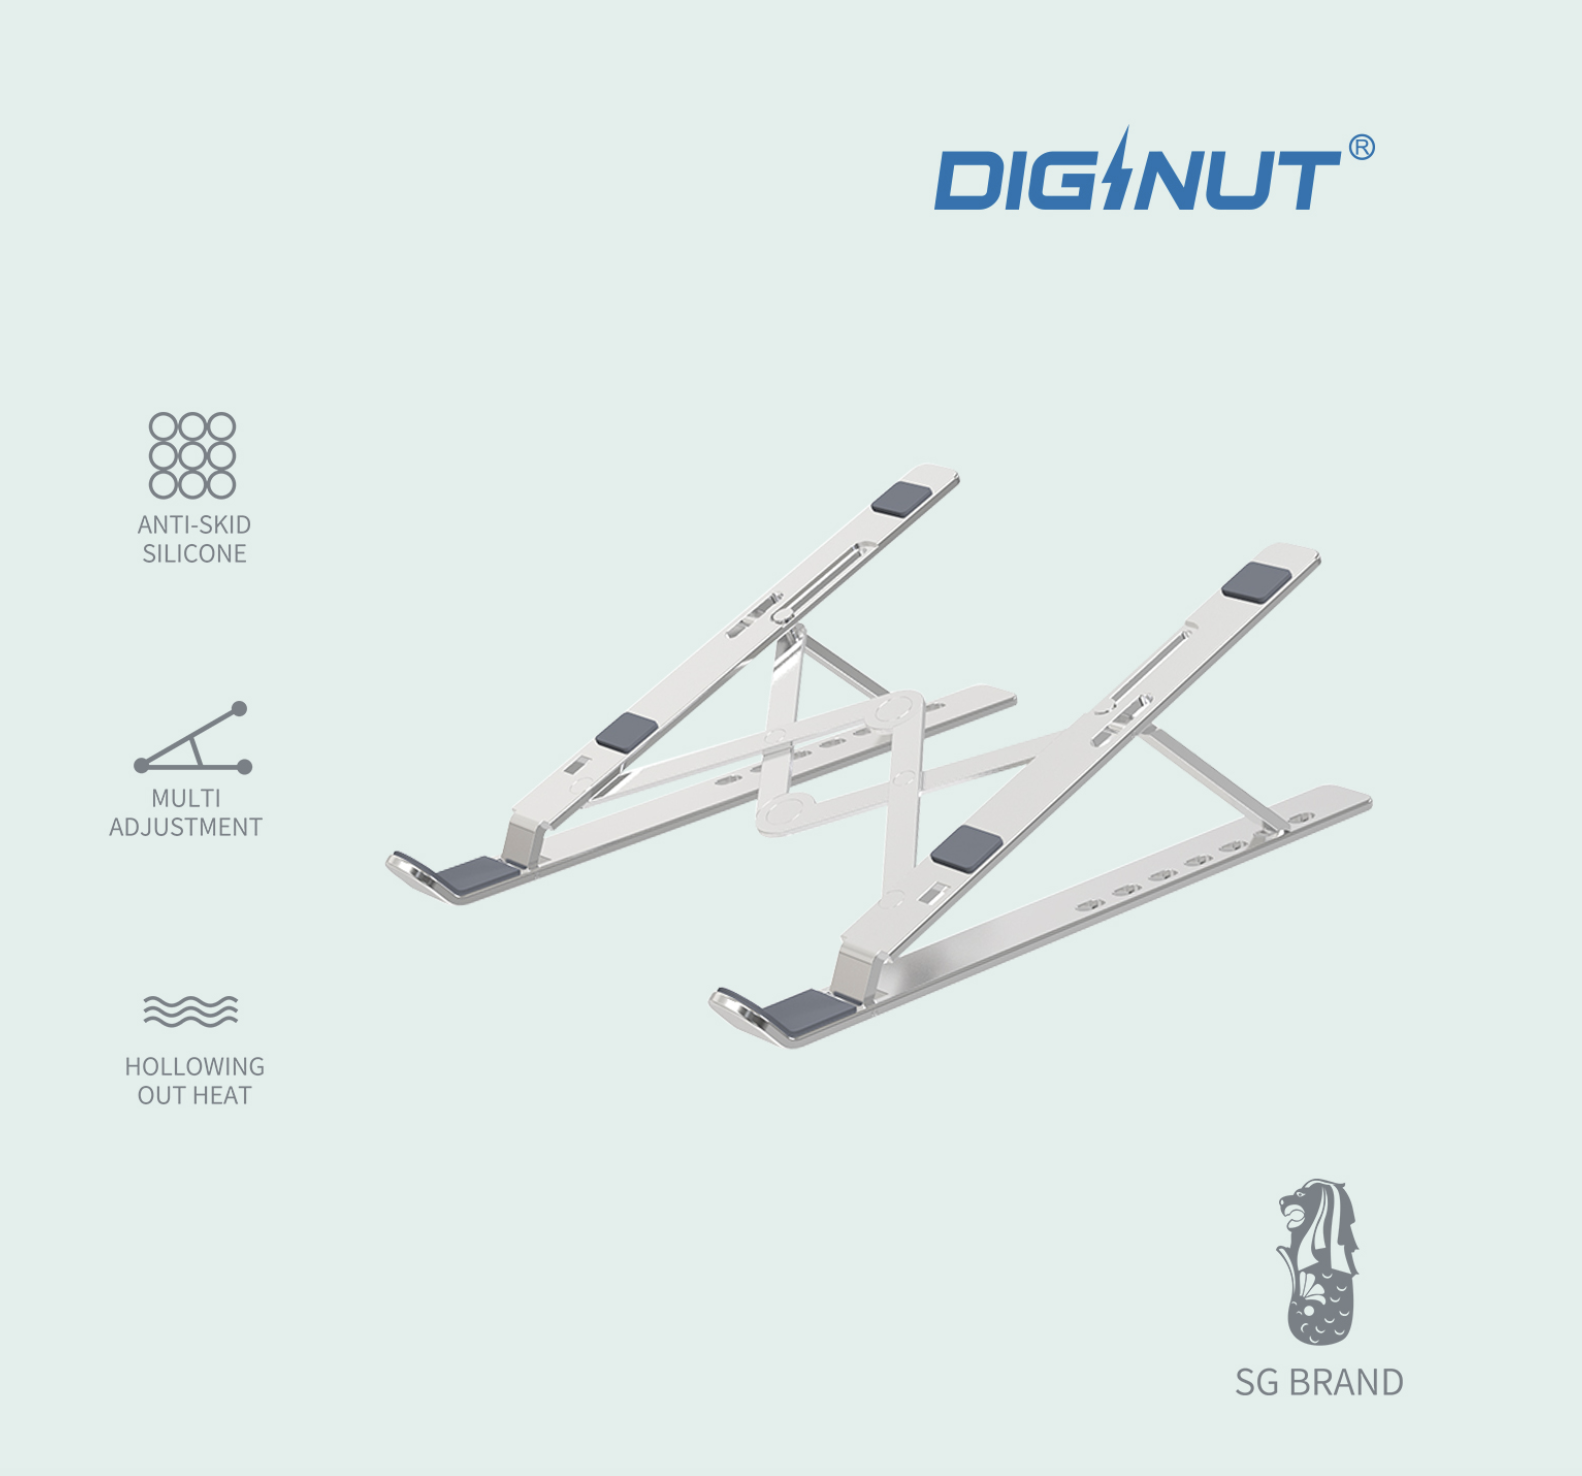 Diginut - SD300 Aluminium Portable Folding Laptop Stand10-17inch/Notebook Stand Holder/Adjustable/Foldable